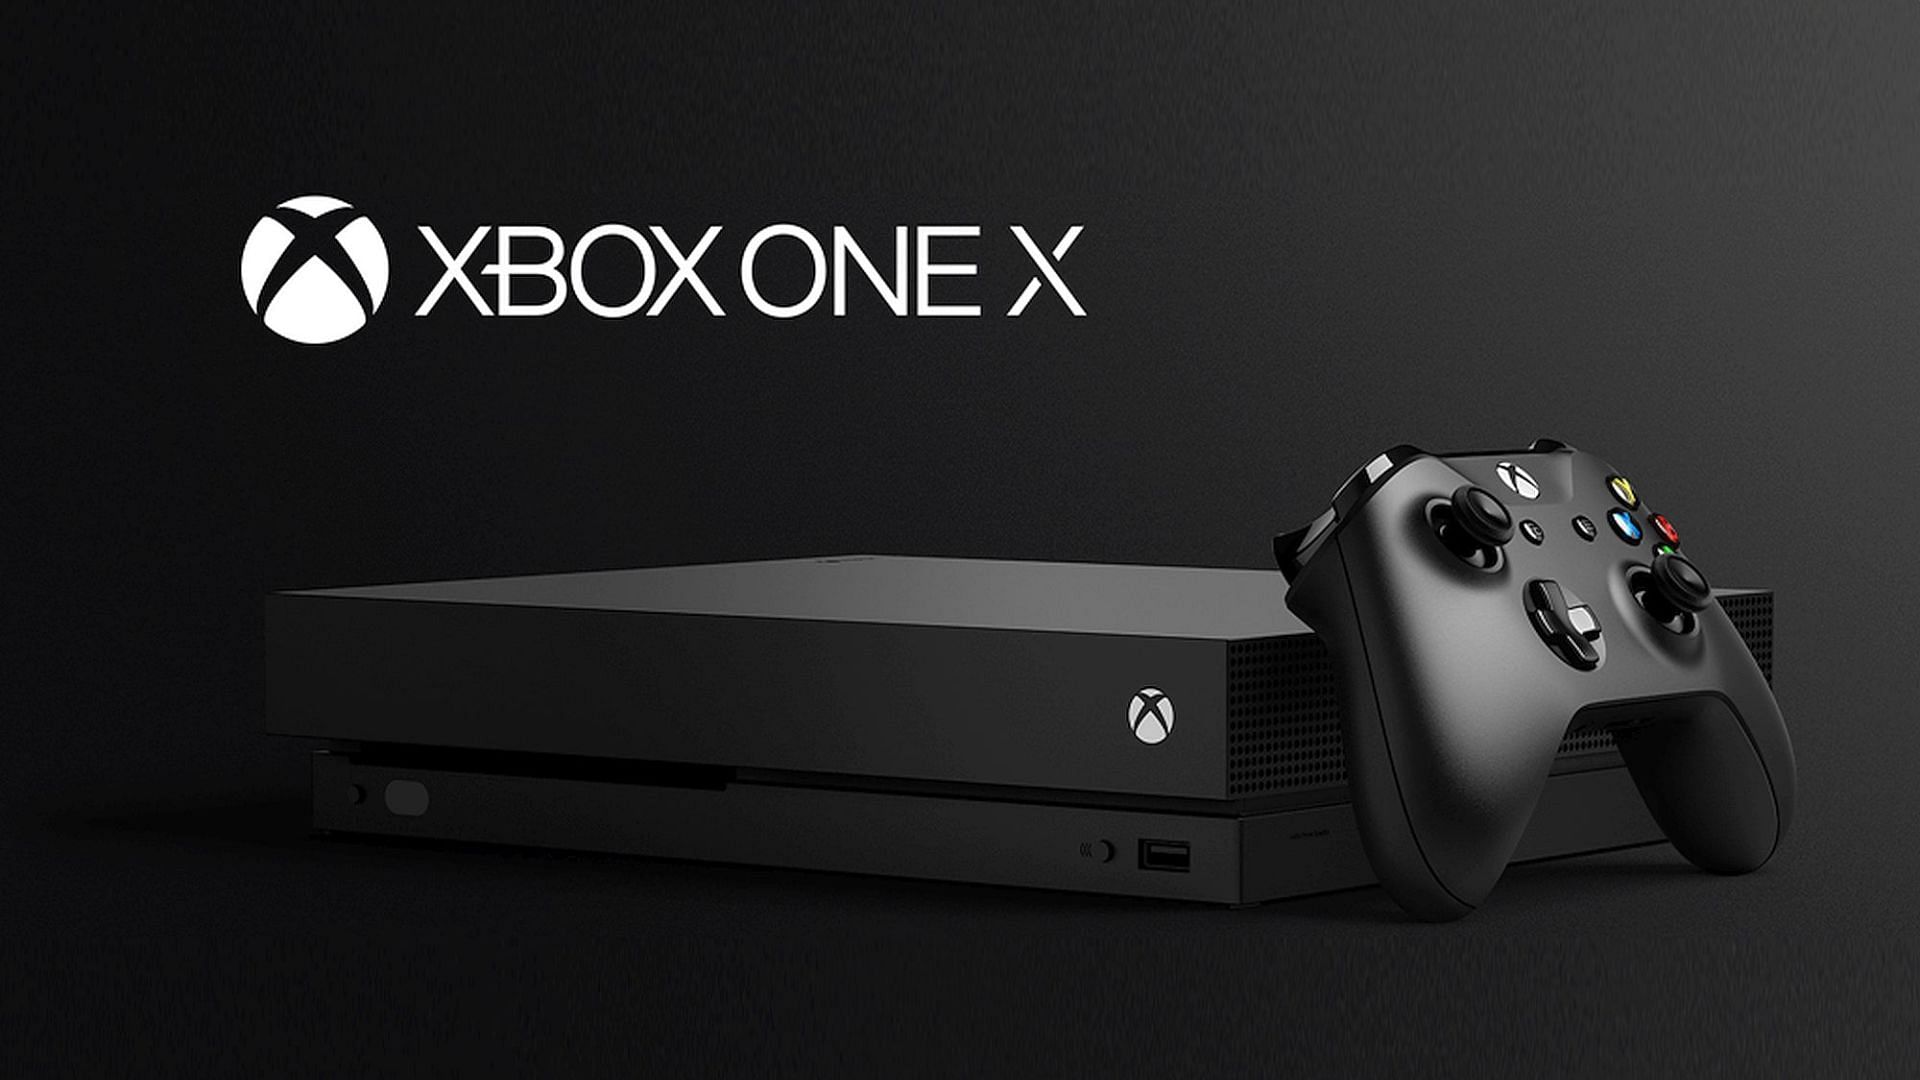 The Xbox One X makes its debut in India for ₹44,990